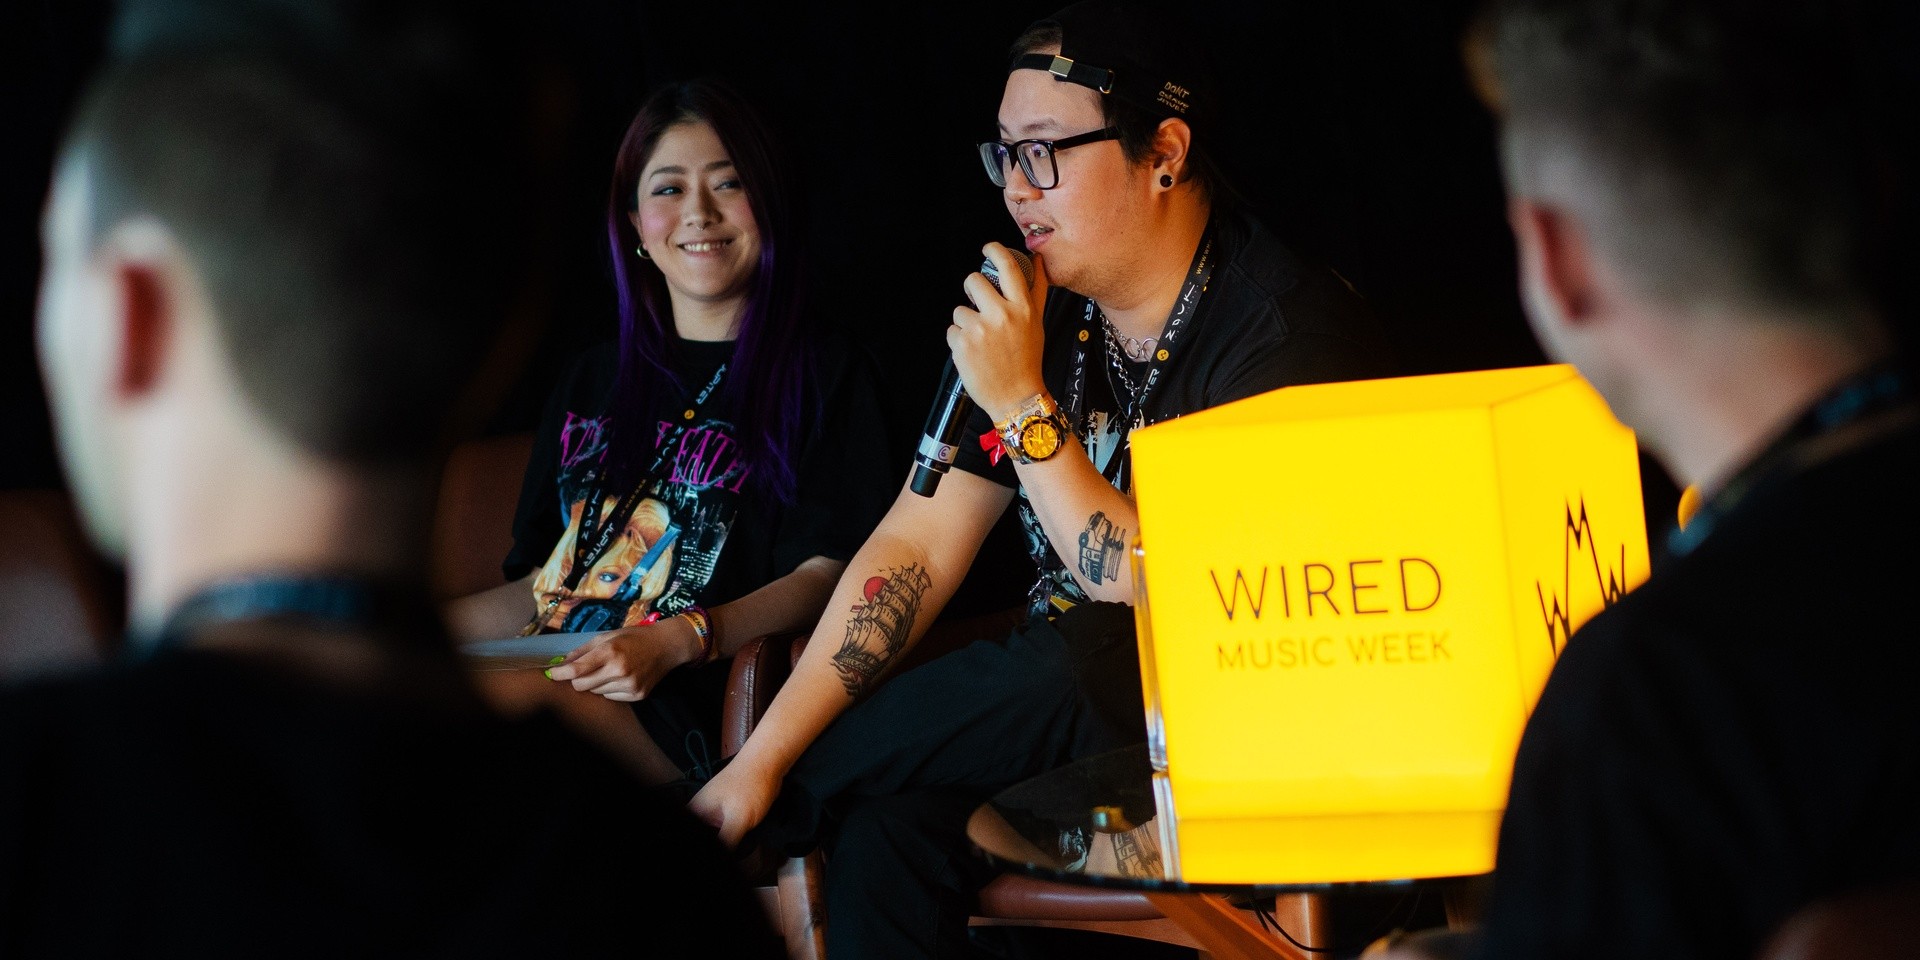 Wired Music Week 2019 promises change in the Asian dance music scene